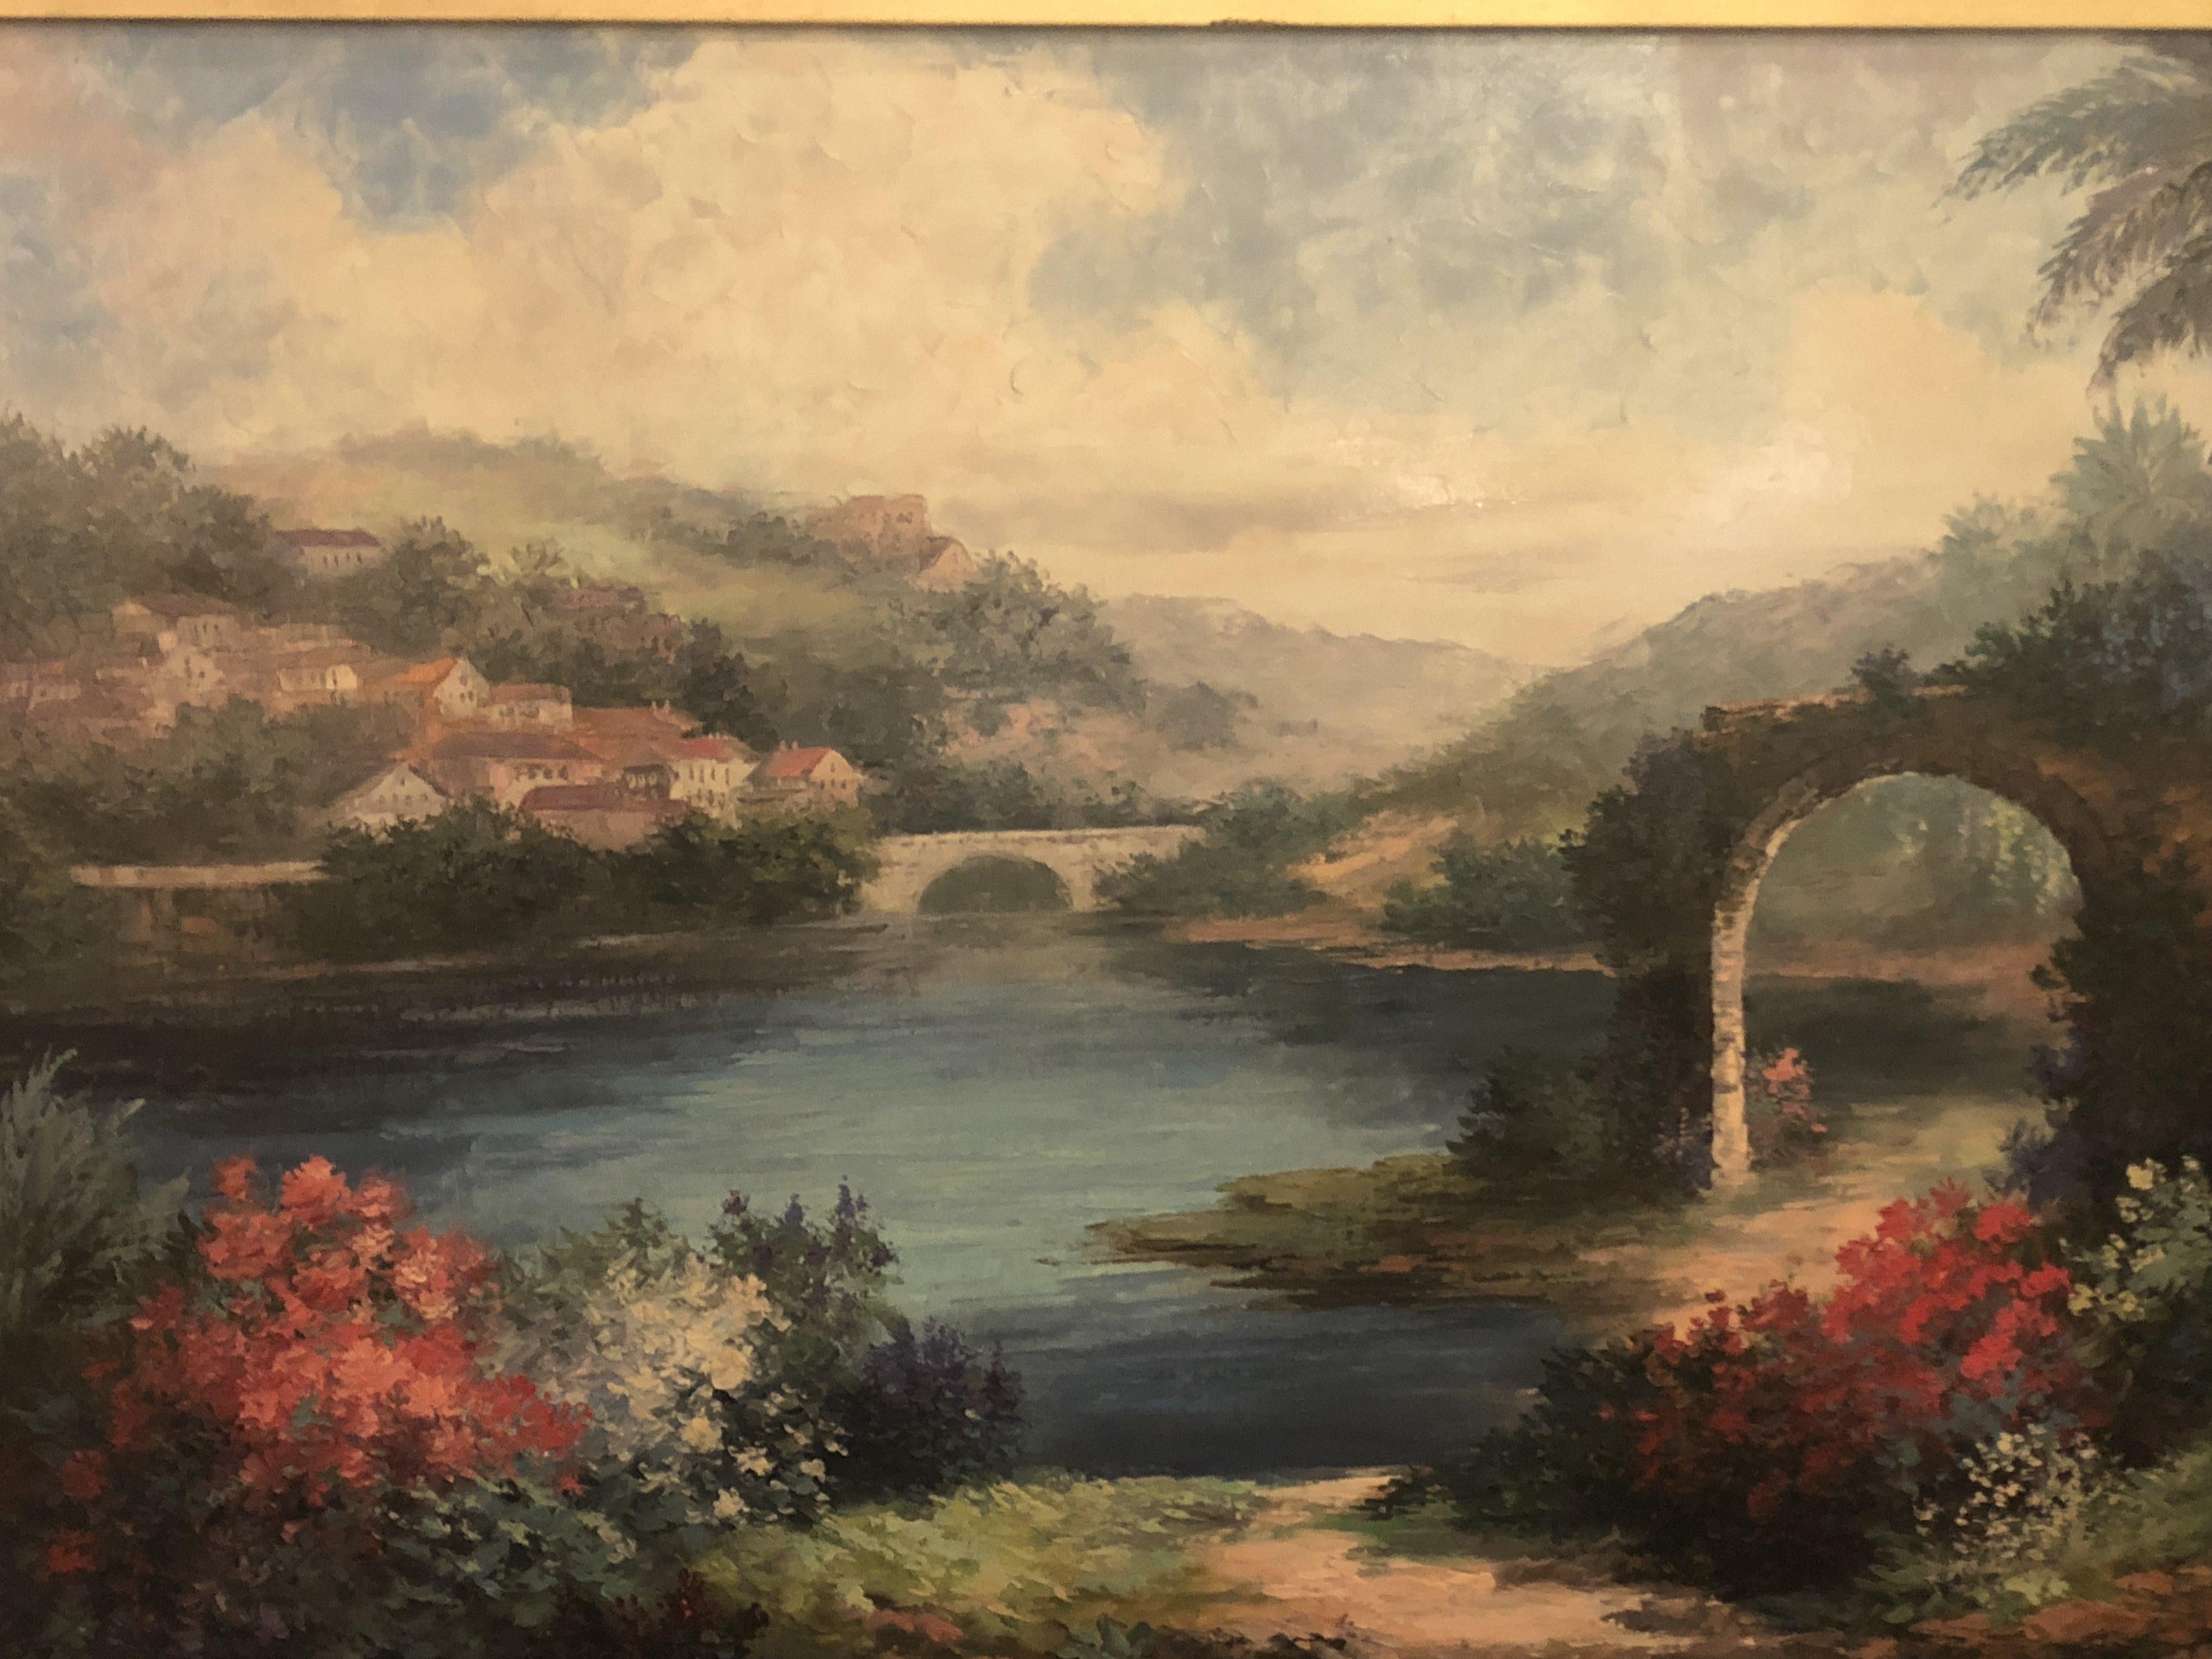 Americana Landscape Oil on Canvas Painting Signed P. Paul, Framed For Sale 1